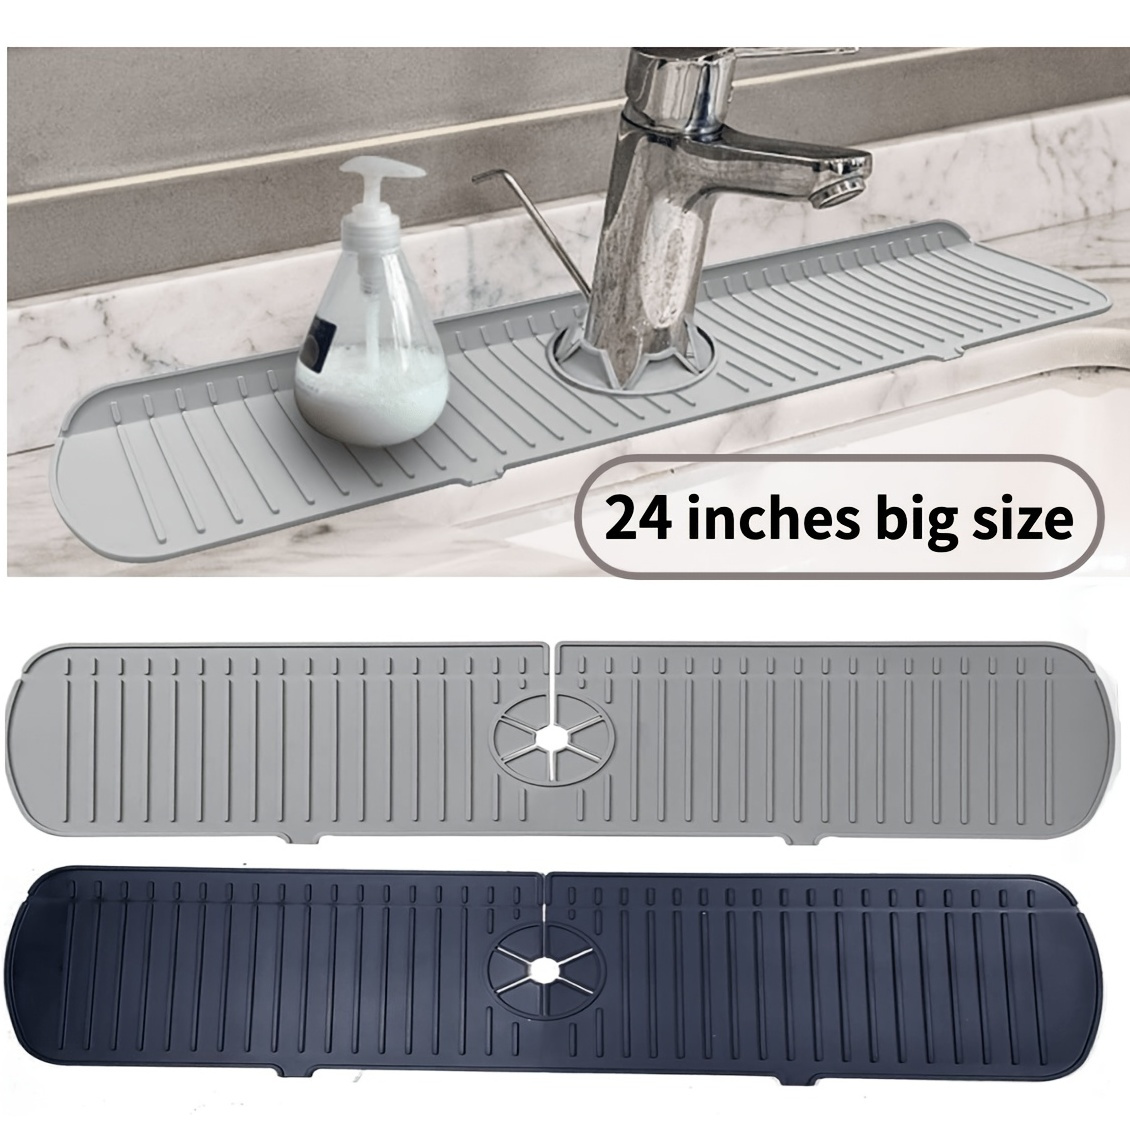 1pc Silicone Makeup Mat, Foldable Sink Cover, Silicone Makeup Desk Cleaning  Mat, Bathroom Sink Drain Beauty Mat, Multifunctional Foldable Item Mat